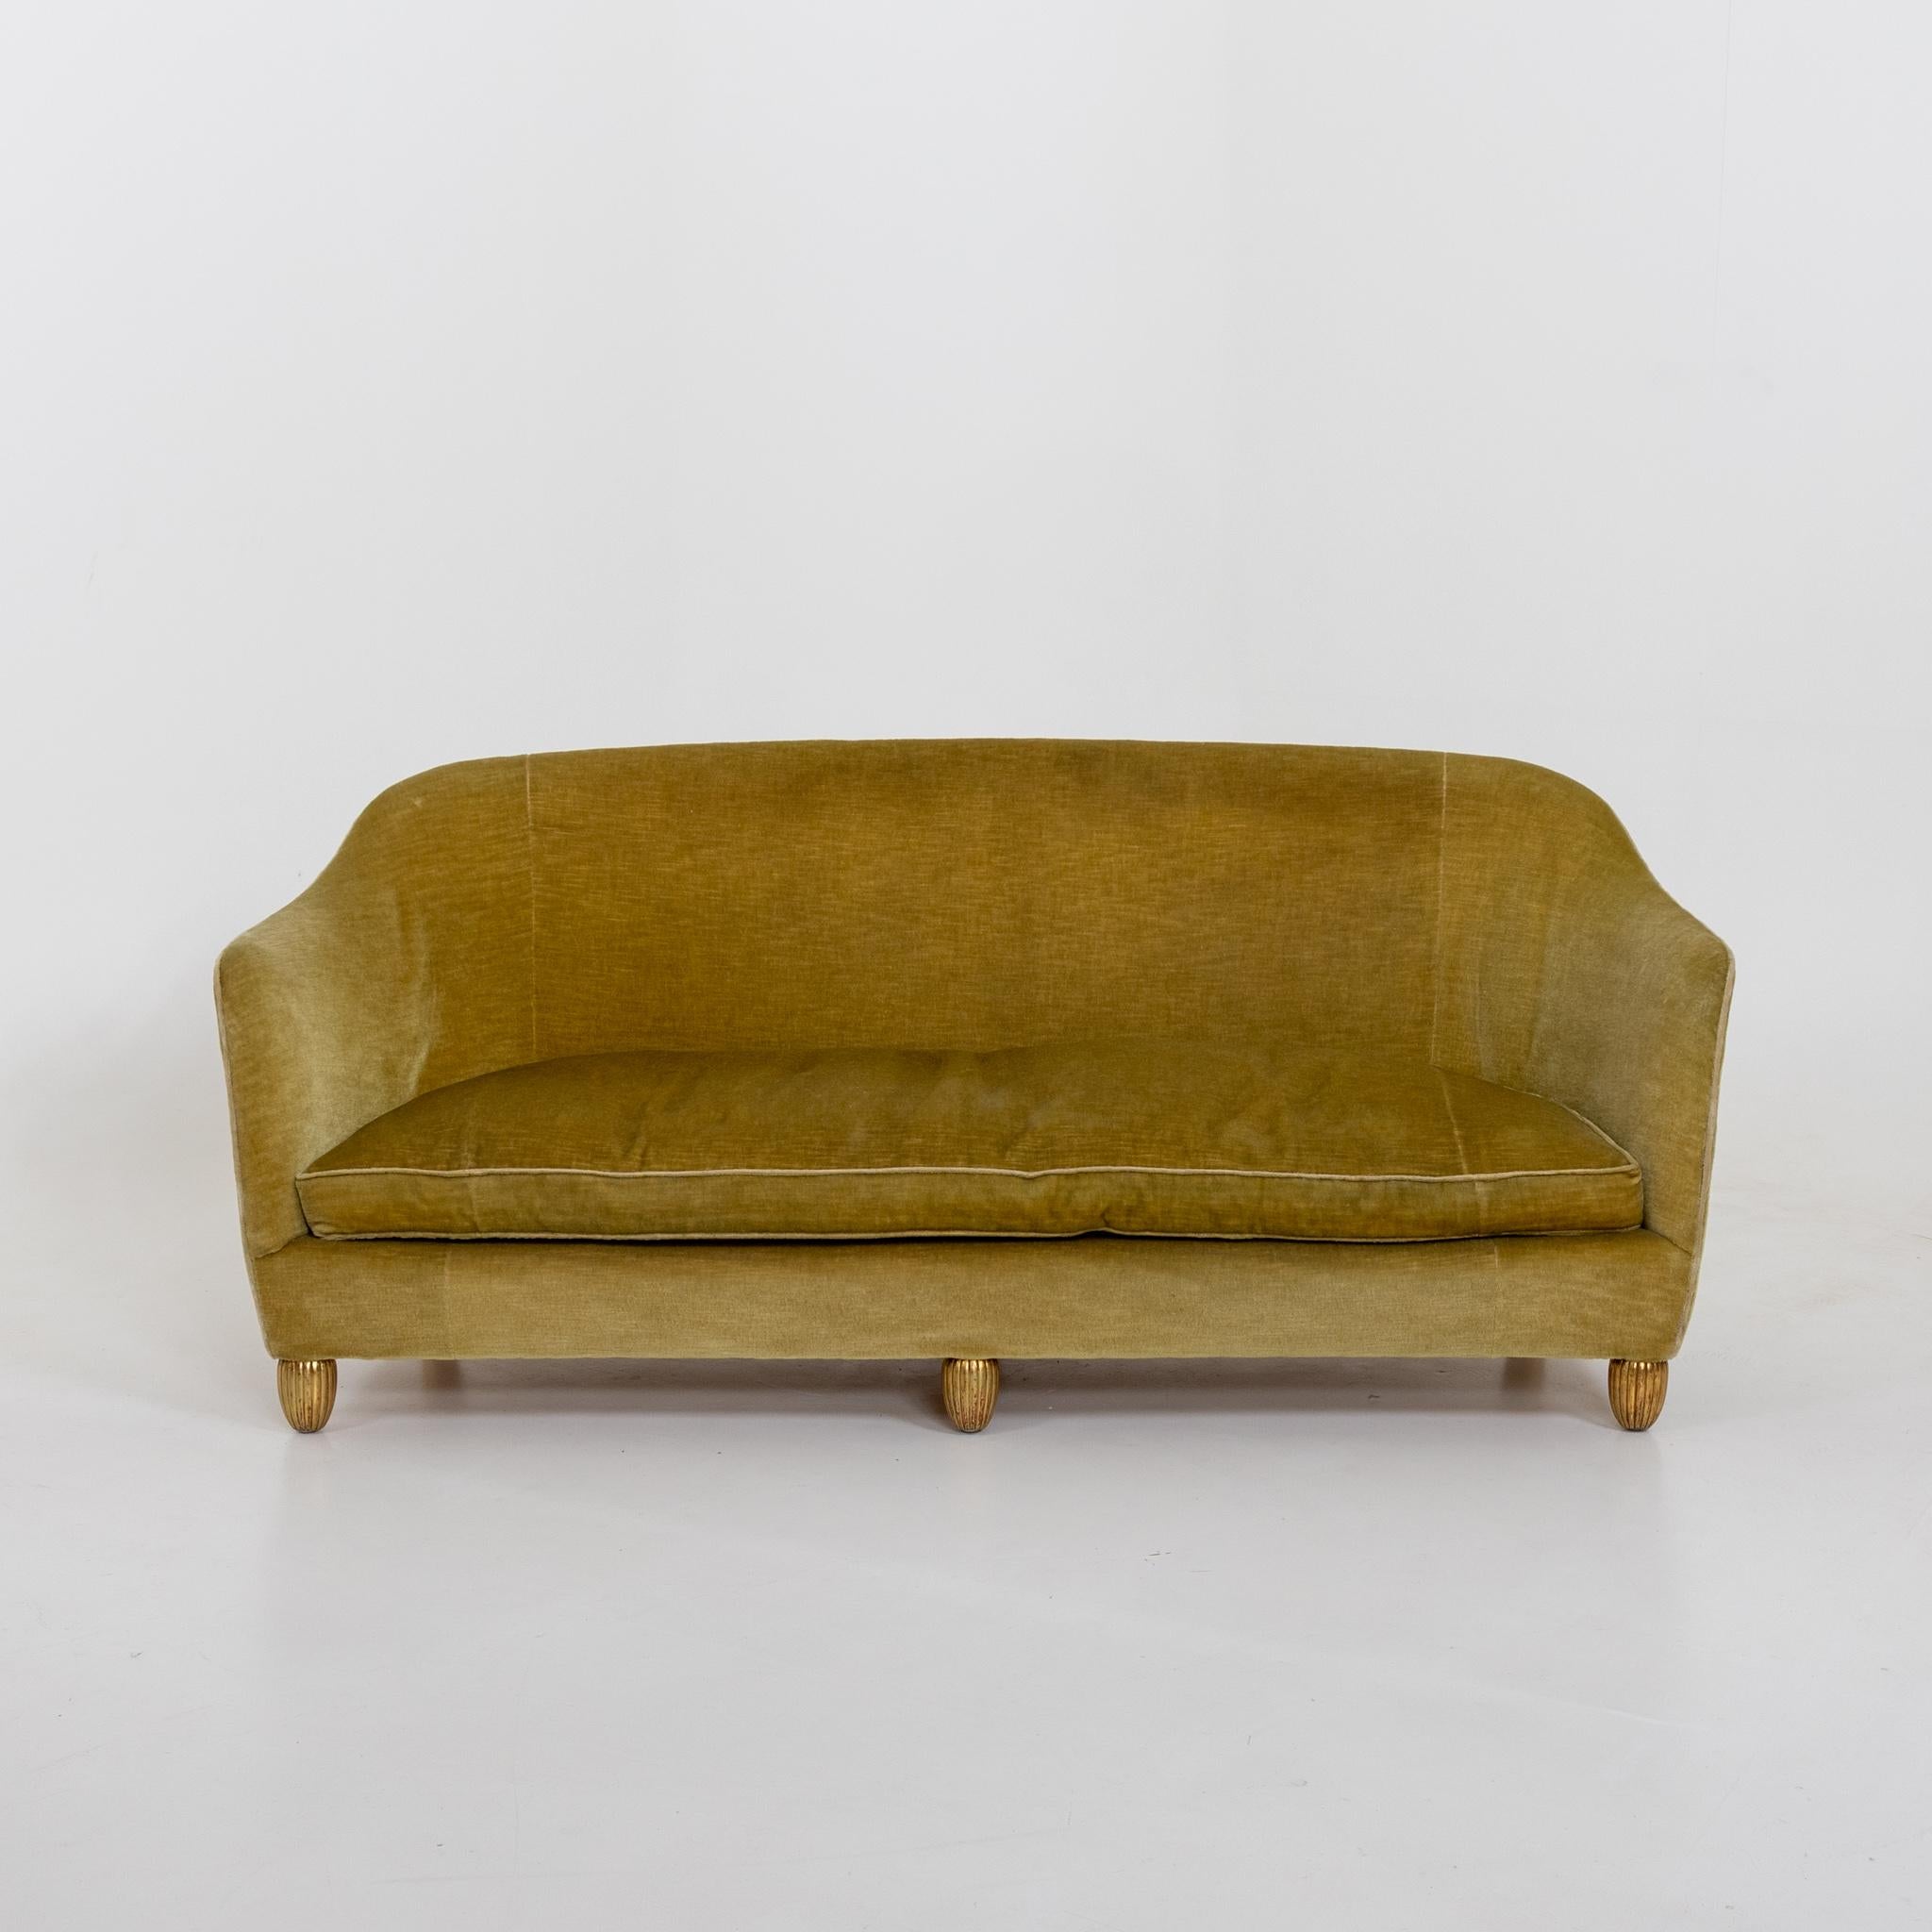 Art Deco sofa by Maison Franck. Frame in original upholstery standing on fluted giltwood feet. Originally ordered in 1938 by Romi Goldmuntz ,owner of a important diamond company in Antwerp, Belgium. This suite of furniture along with a desk and